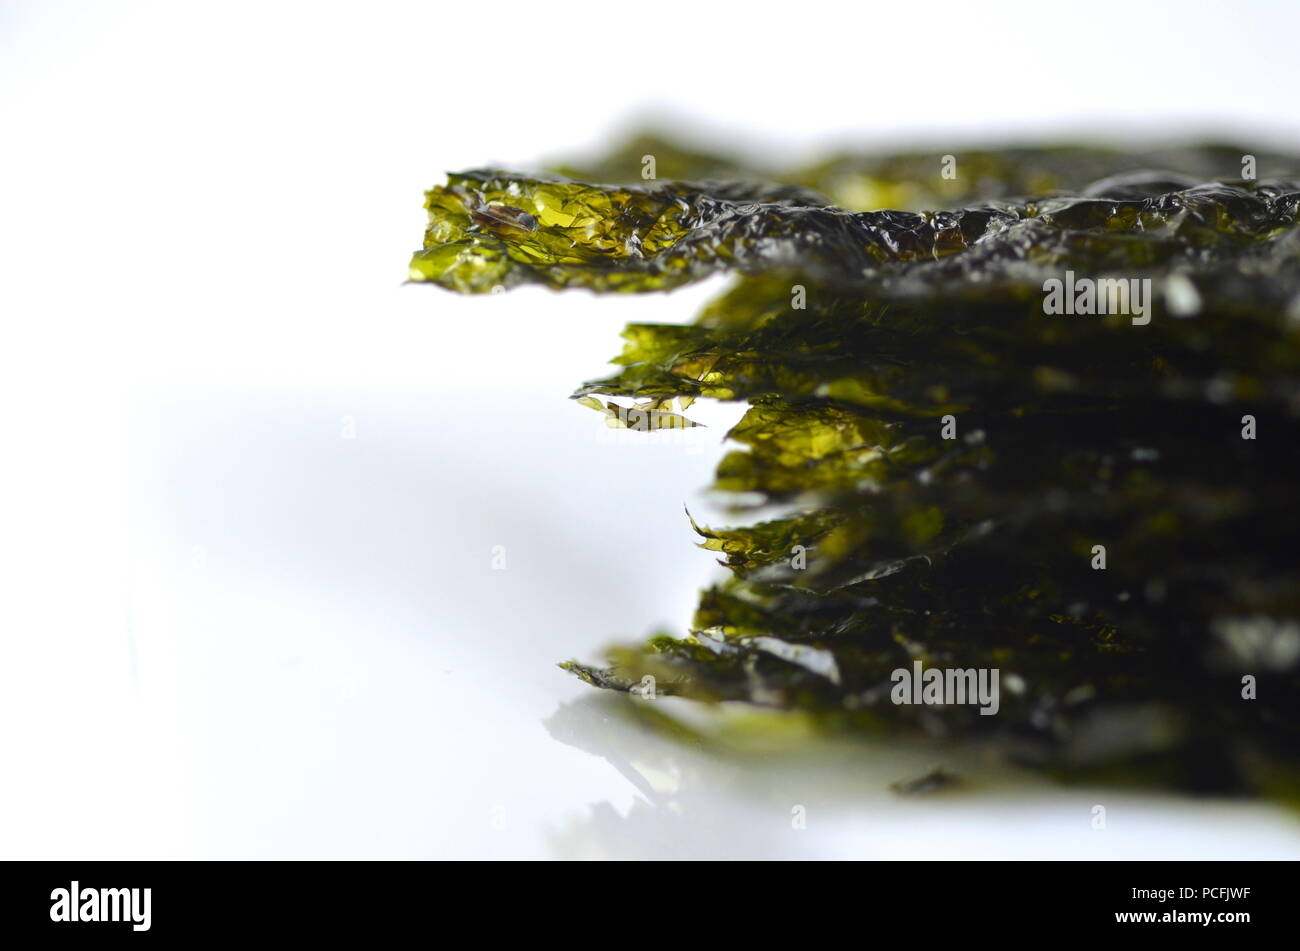 Detail top view of dried seaweed: nori. Isolated on white.Nutrient rich vegan, raw and healthy sea vegetables. Stock Photo